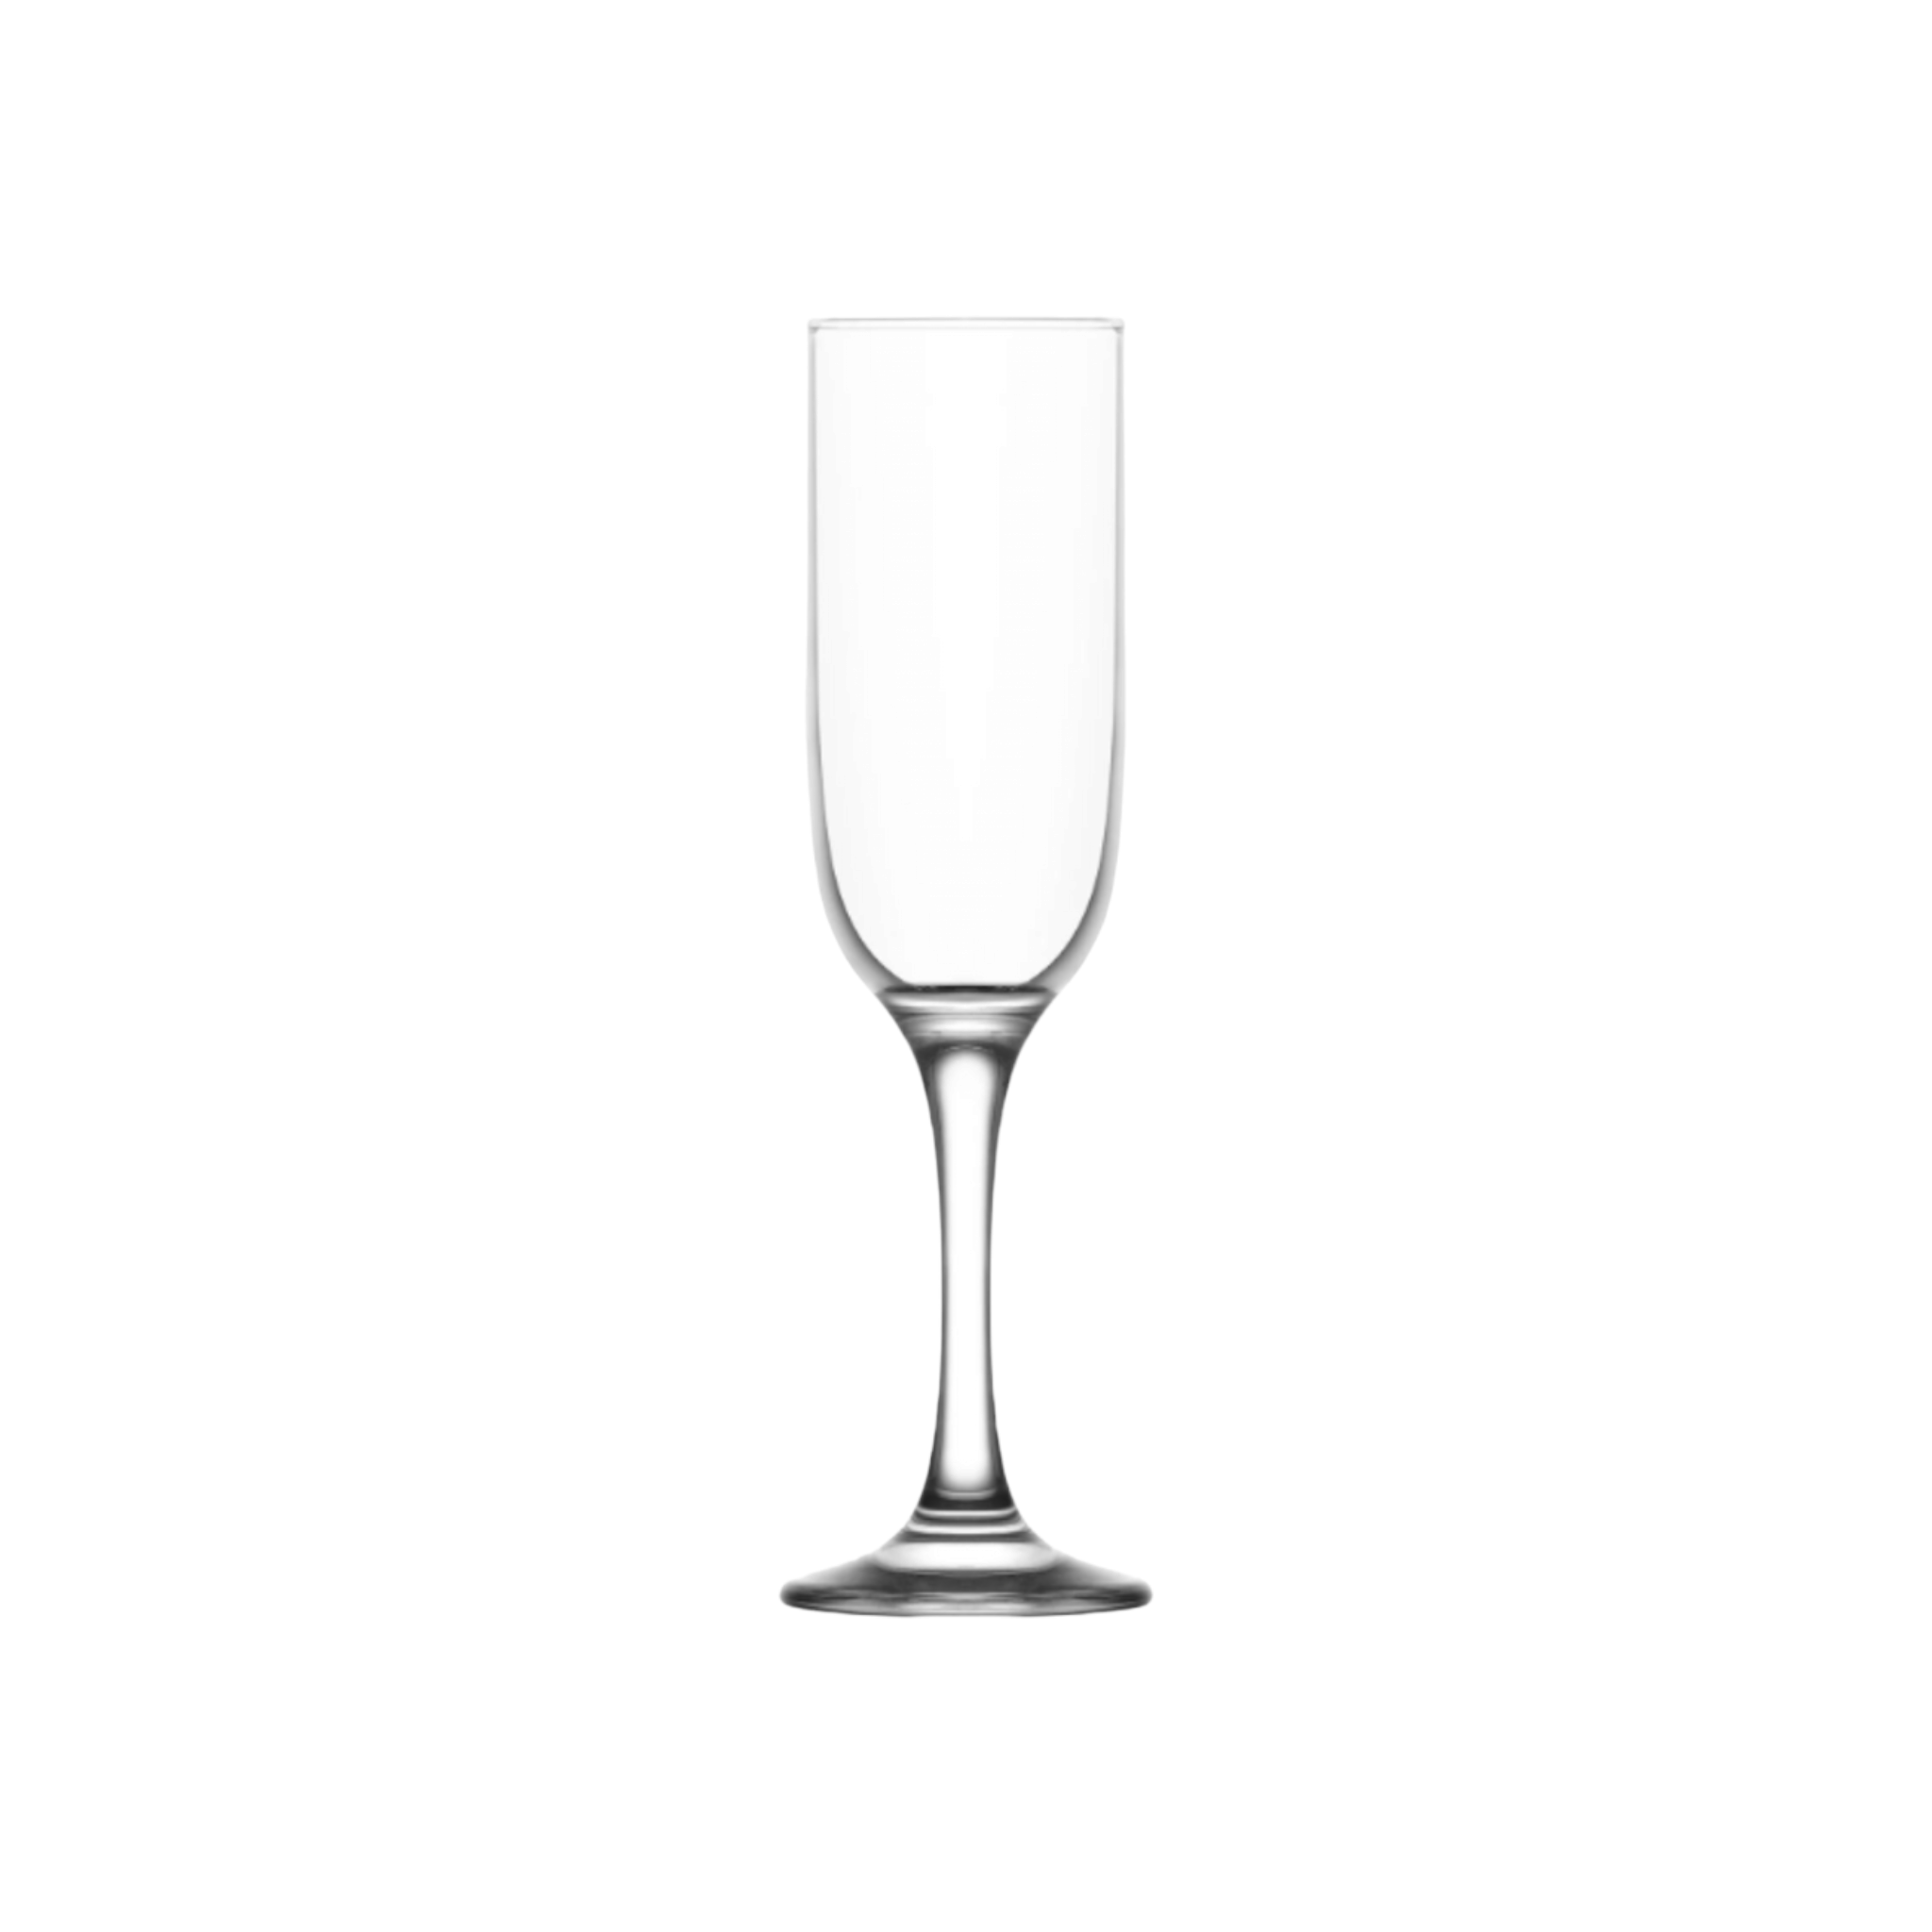 LAV Glass Tumbler 210ml Toyko Champagne 6pack SGN780